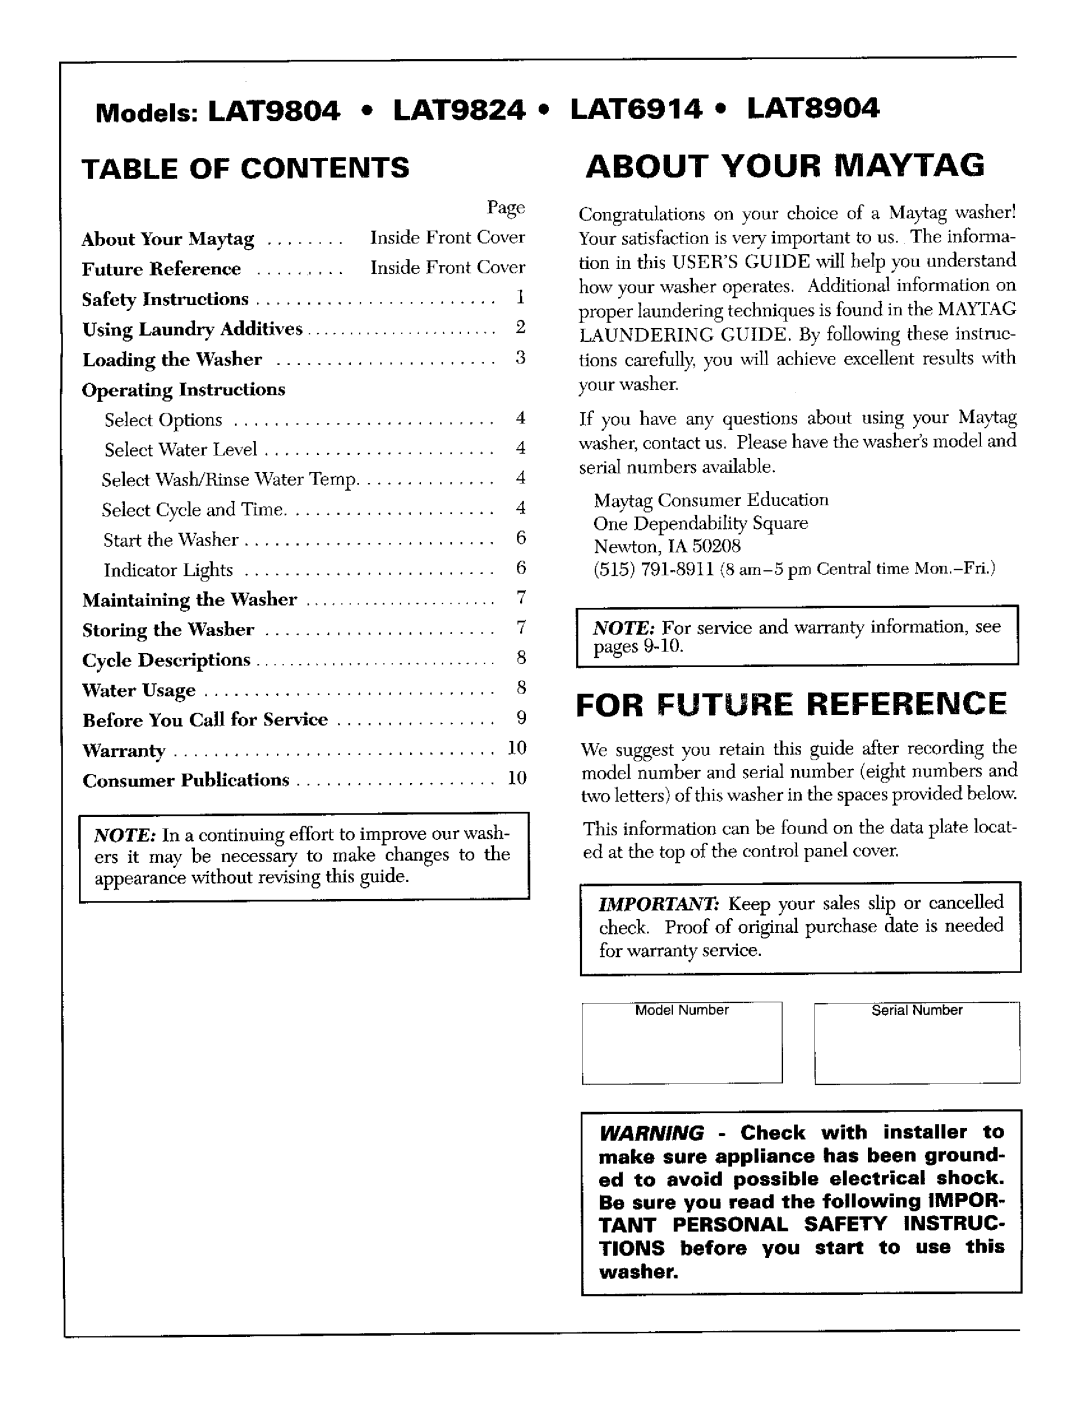 Maytag operating instructions Models LAT9804 LAT9824 LAT6914 LAT8904, Table Of Contents, About Your Maytag, pages, 9-10 